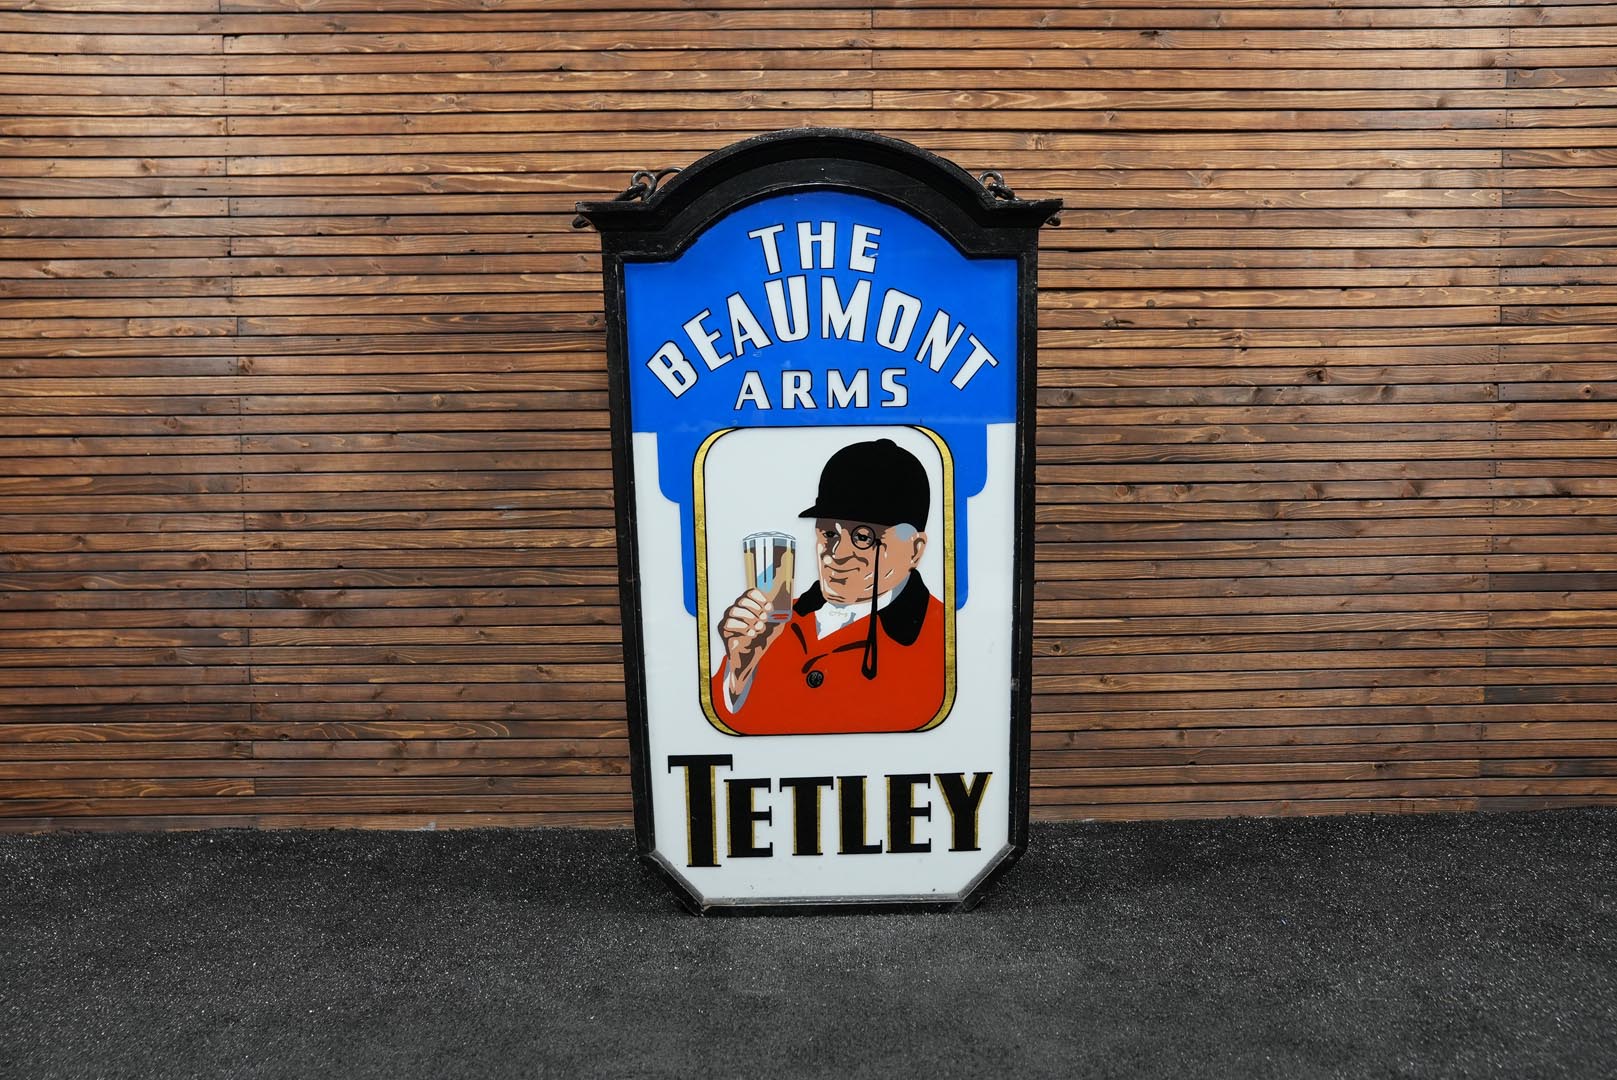 Tetley Ales-Beaumont Arms Large Lighted Sign